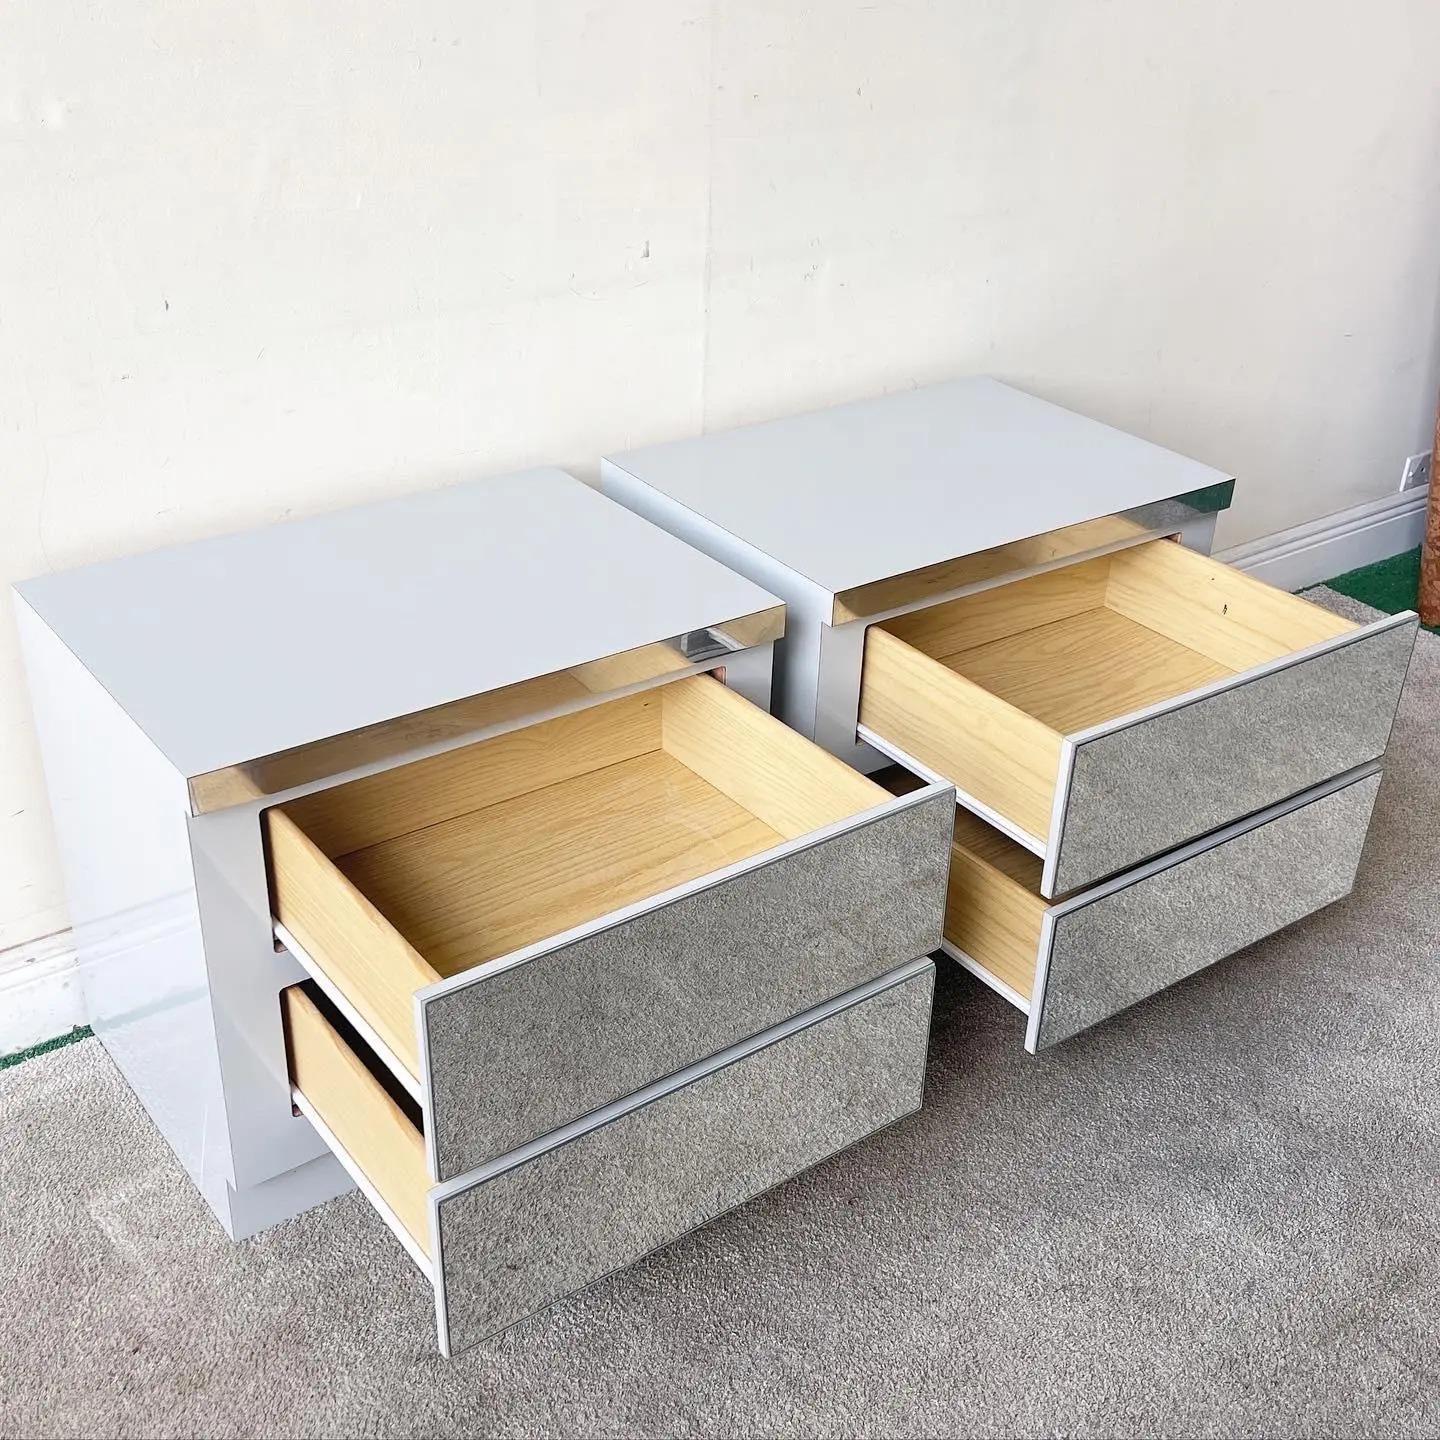 Exceptional postmodern pair of nightstands. Each feature a gray lacquer laminate and two spacious drawers with mirrored faces.

Additional information:
Materials: Mirror, Wood
Color: Gray
Style: Postmodern
Time Period: 1980s
Place of Origin: